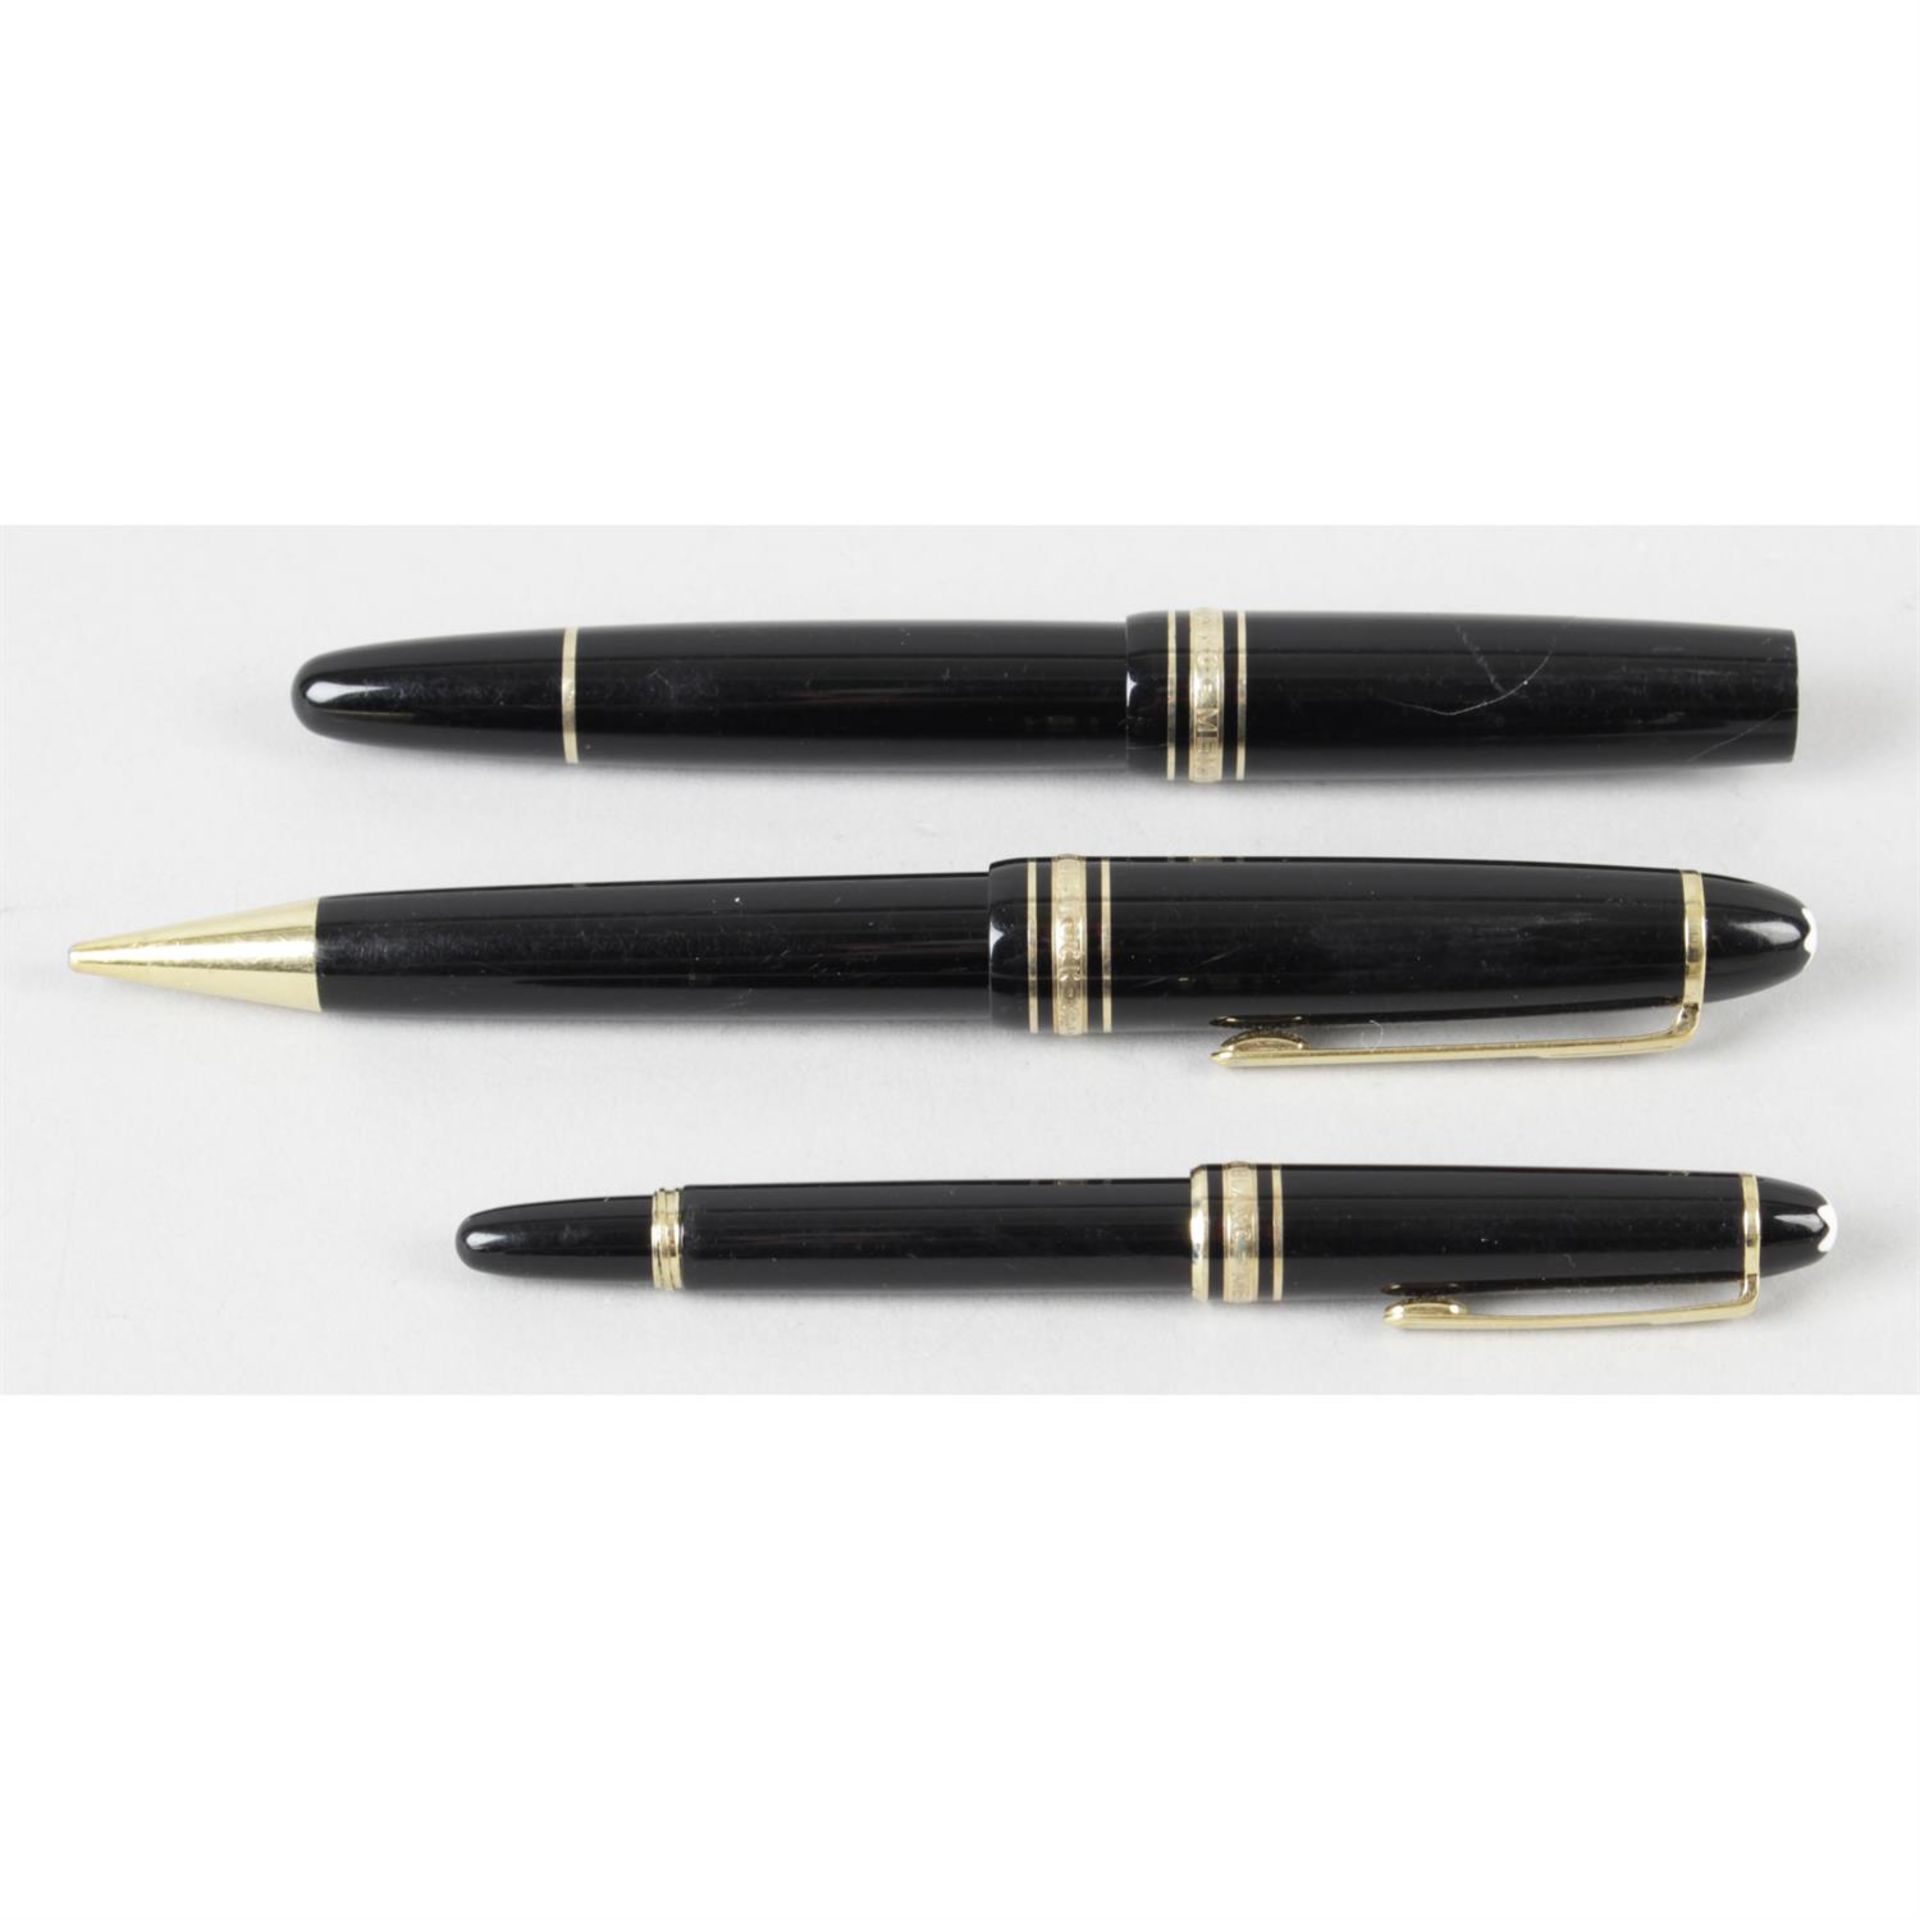 A small mixed selection of Montblanc pens.